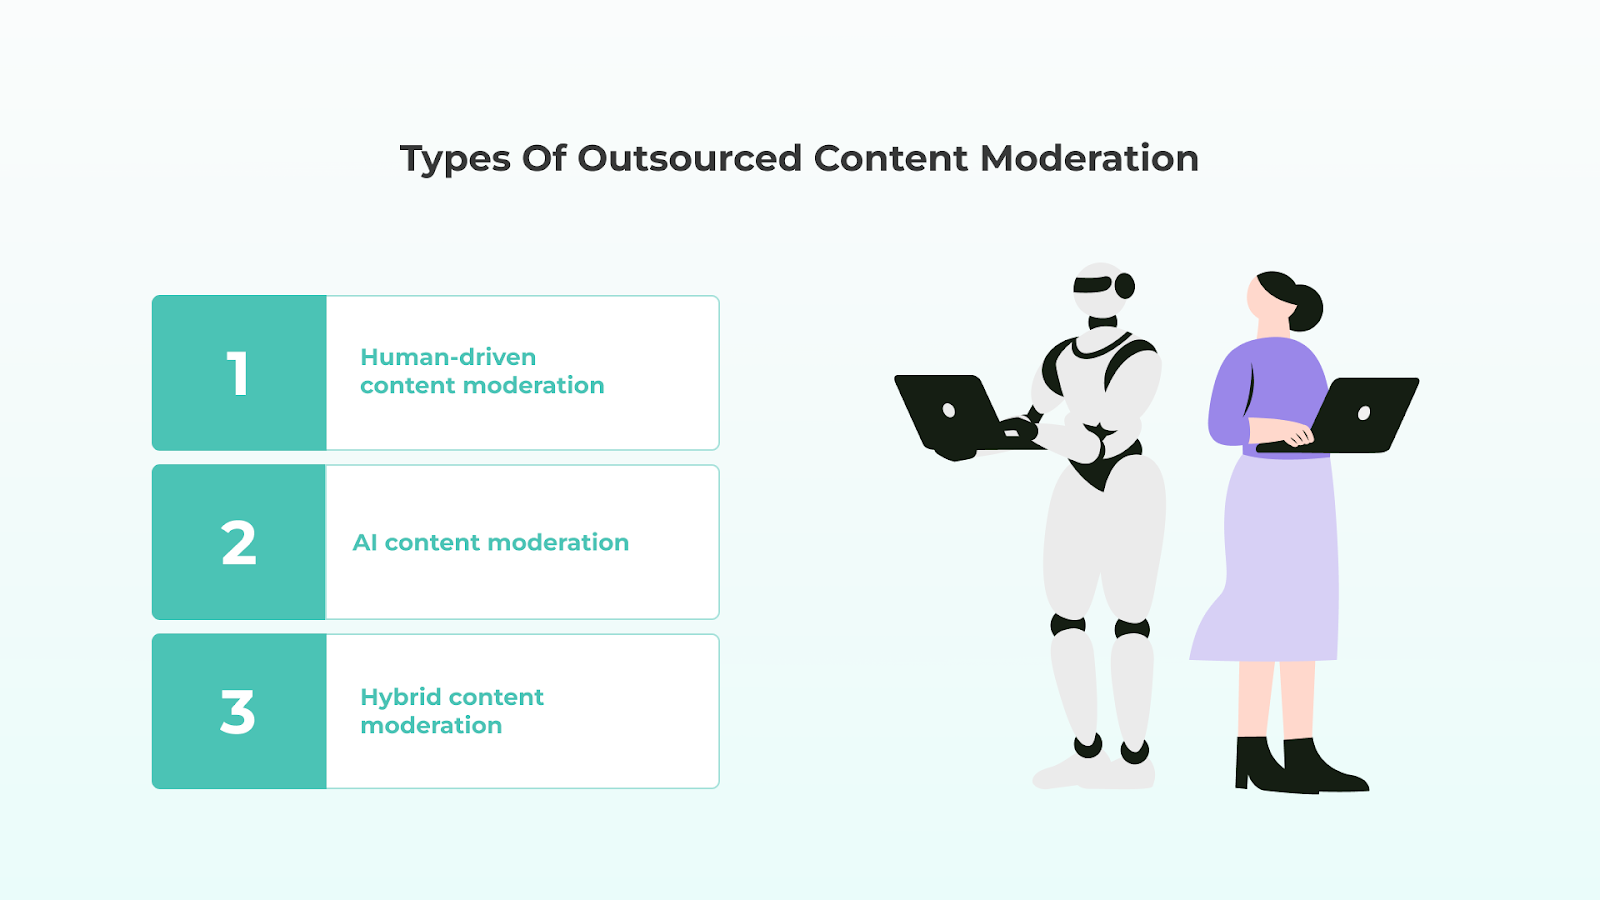 Types of Outsourced Content Moderation